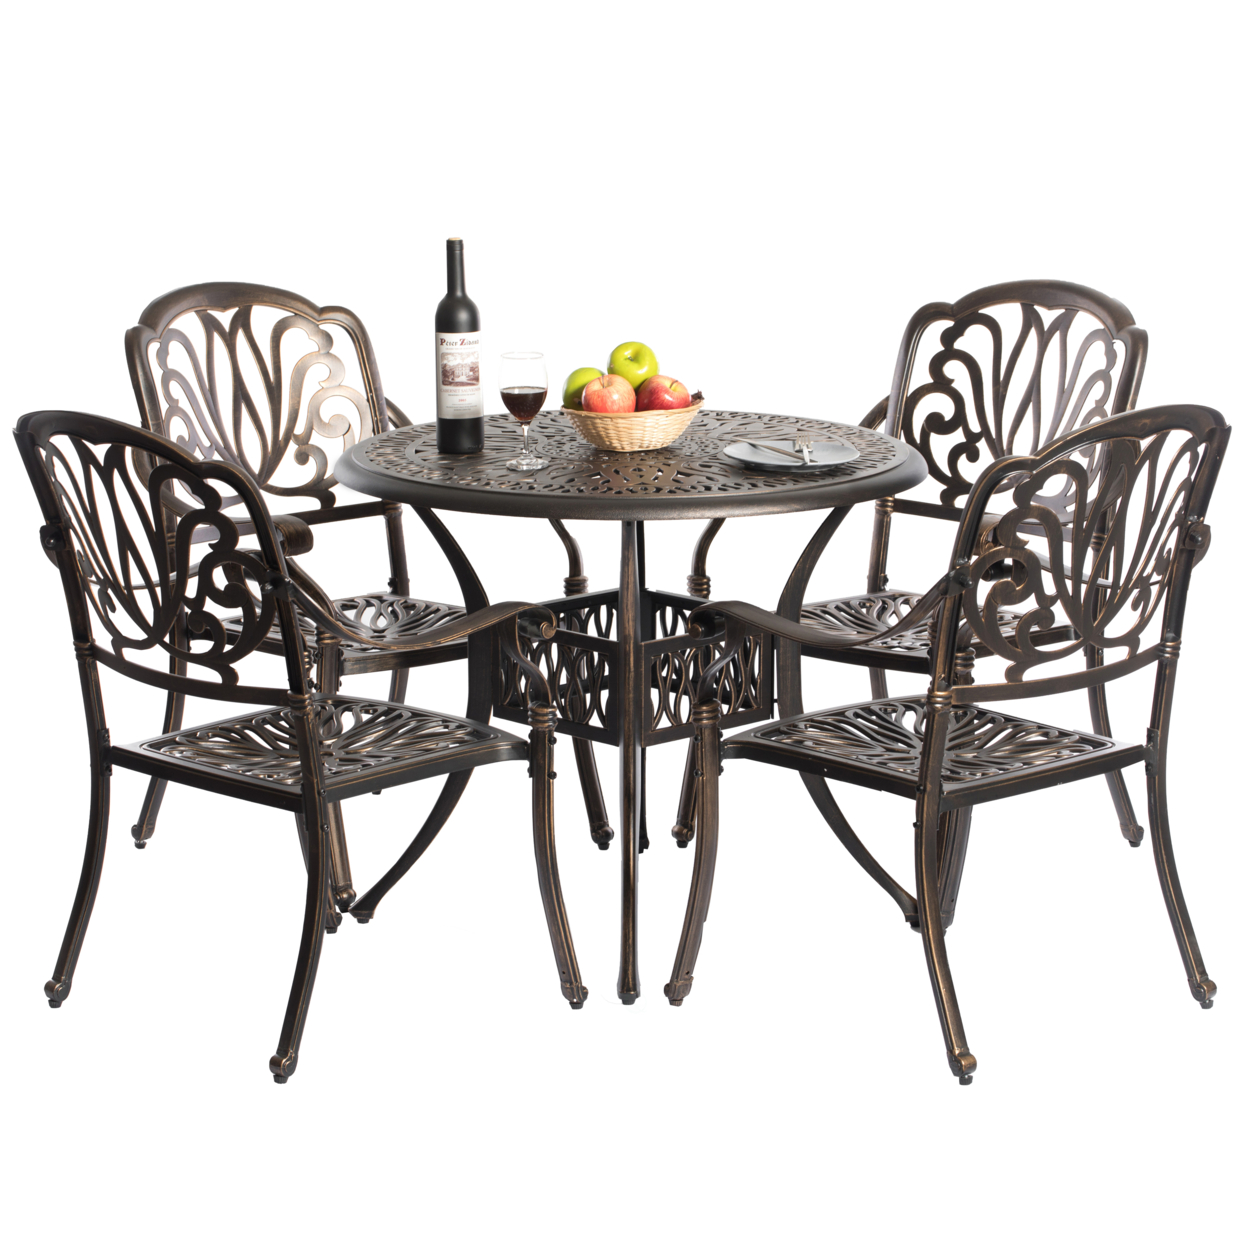 Indoor And Outdoor Bronze Dinning Set 4 Chairs With 1 Table Bistro Patio Cast Aluminum.